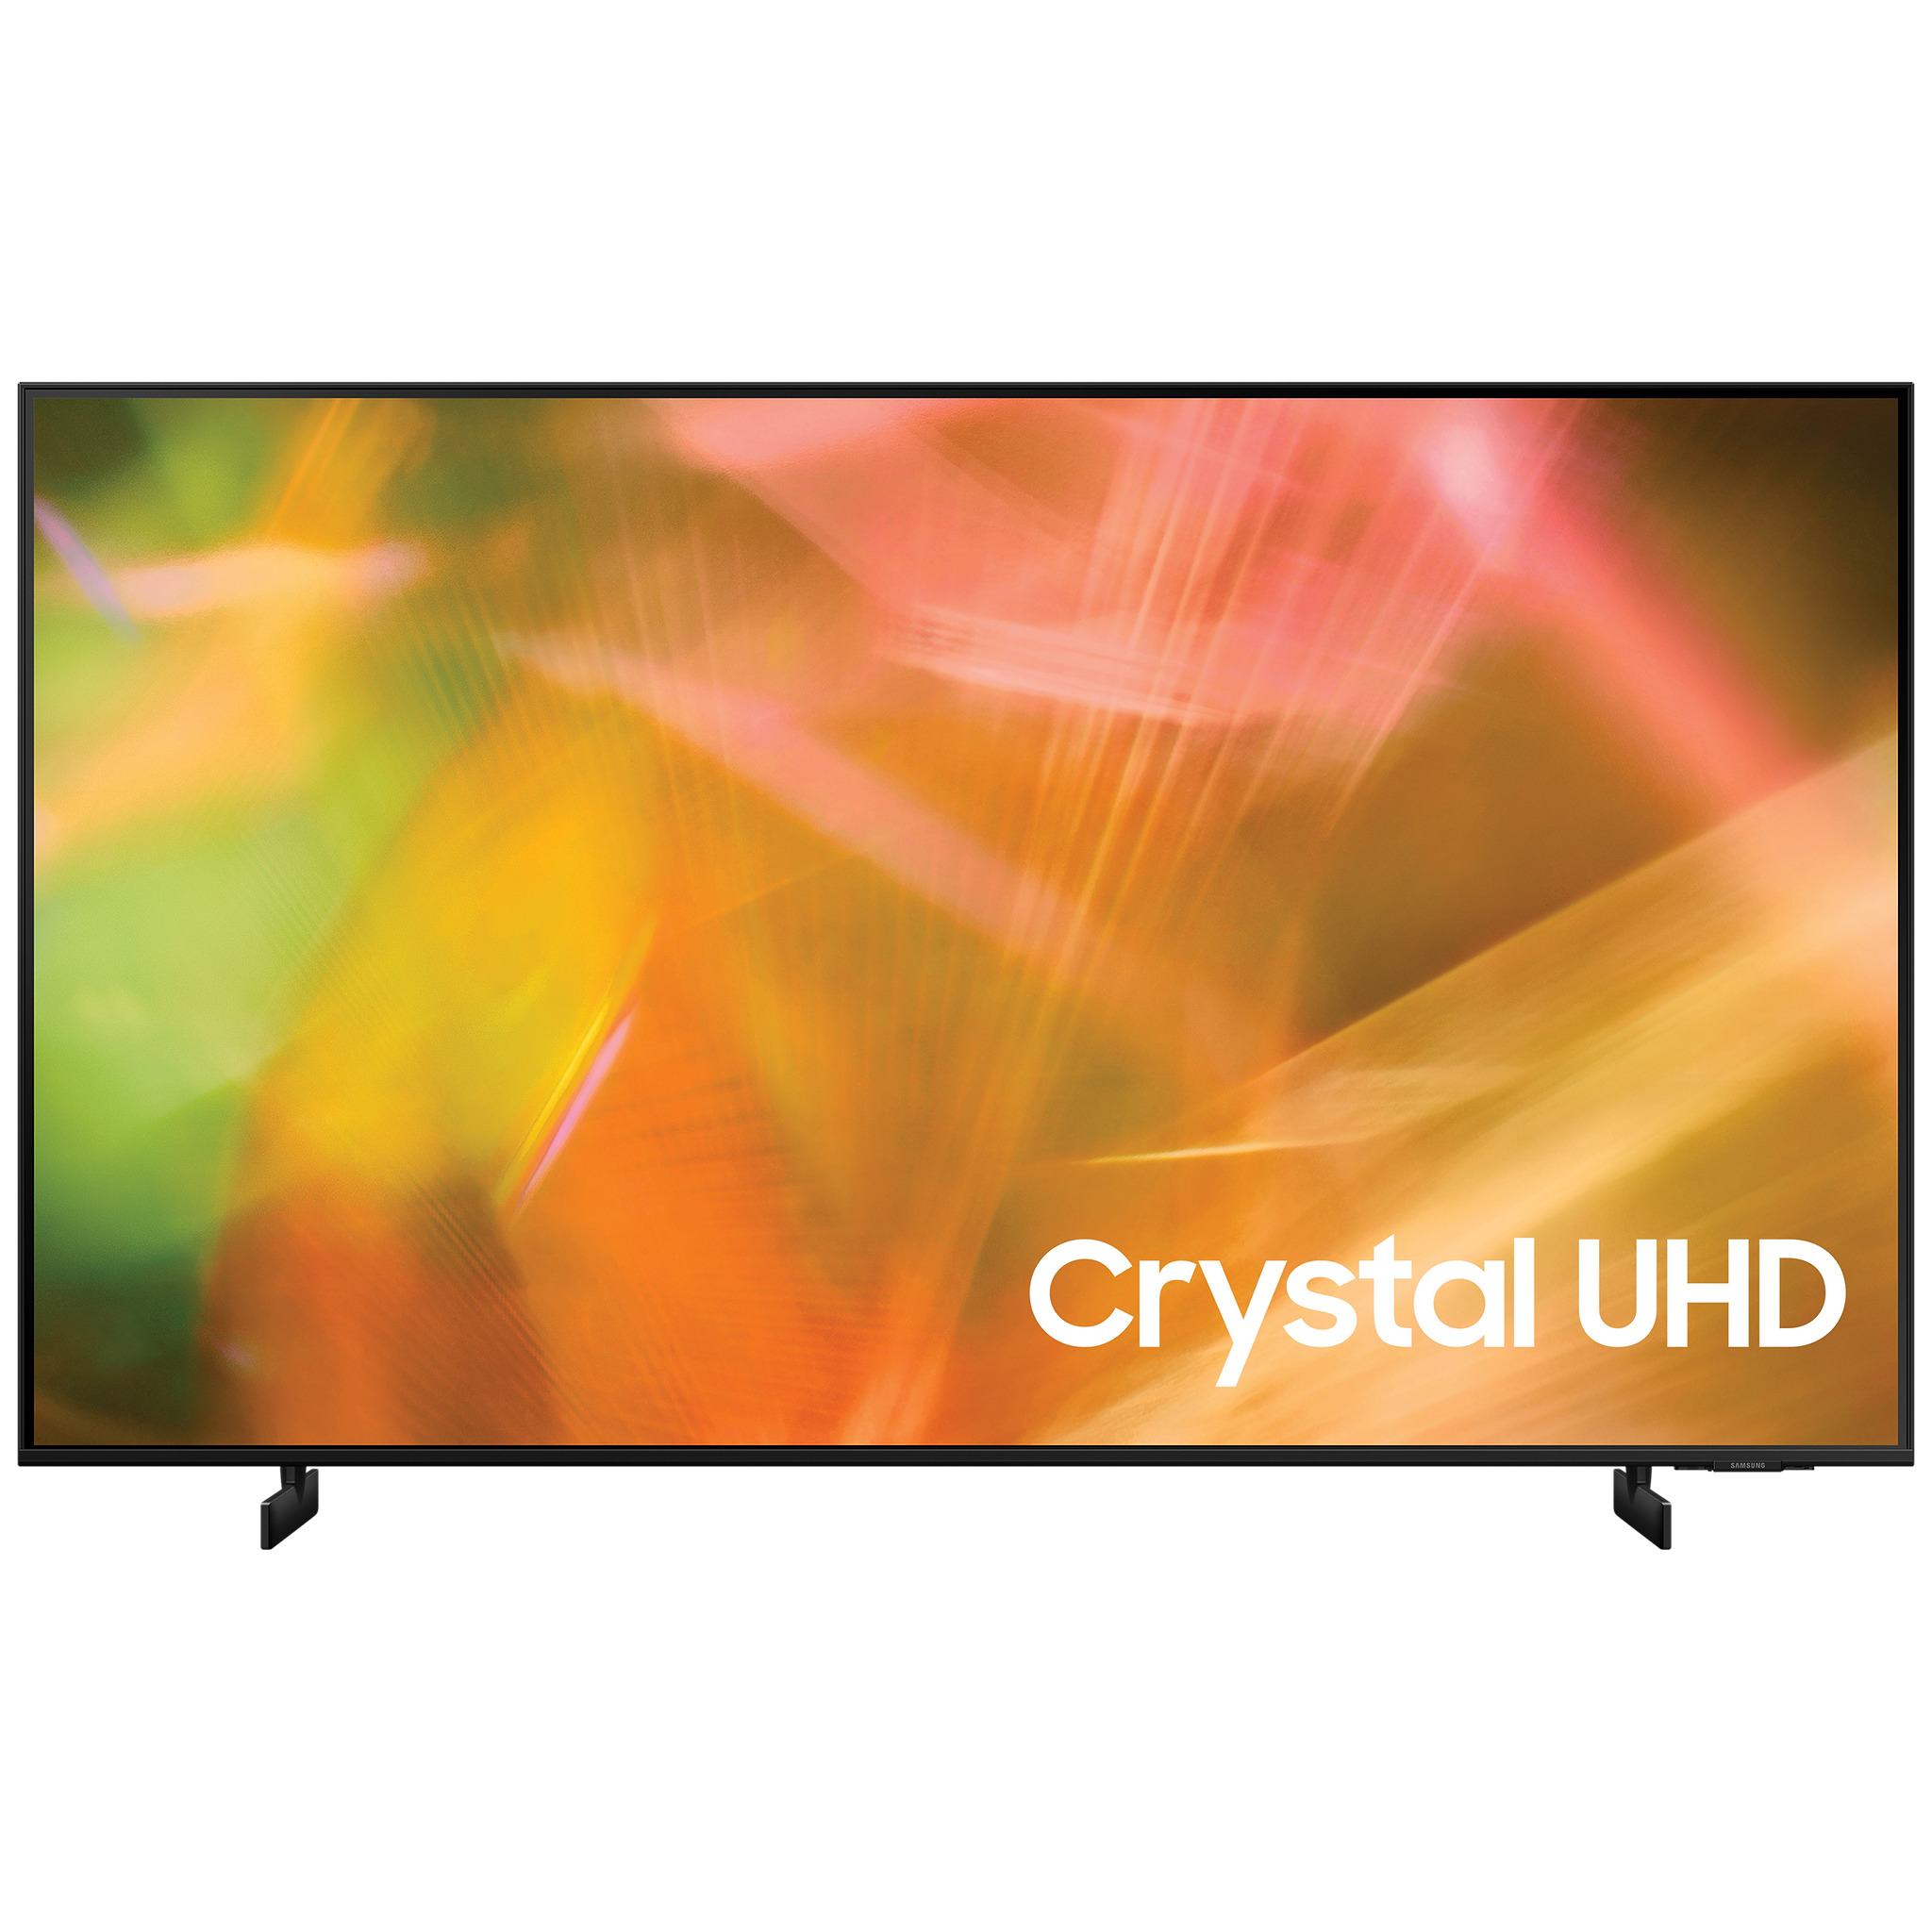 Croma Retail - Samsung 8 Series 216cm (85 Inch) Ultra HD 4K LED Smart TV (Multi Voice Assistant Supported, UA85AU8000KXXL, Black)